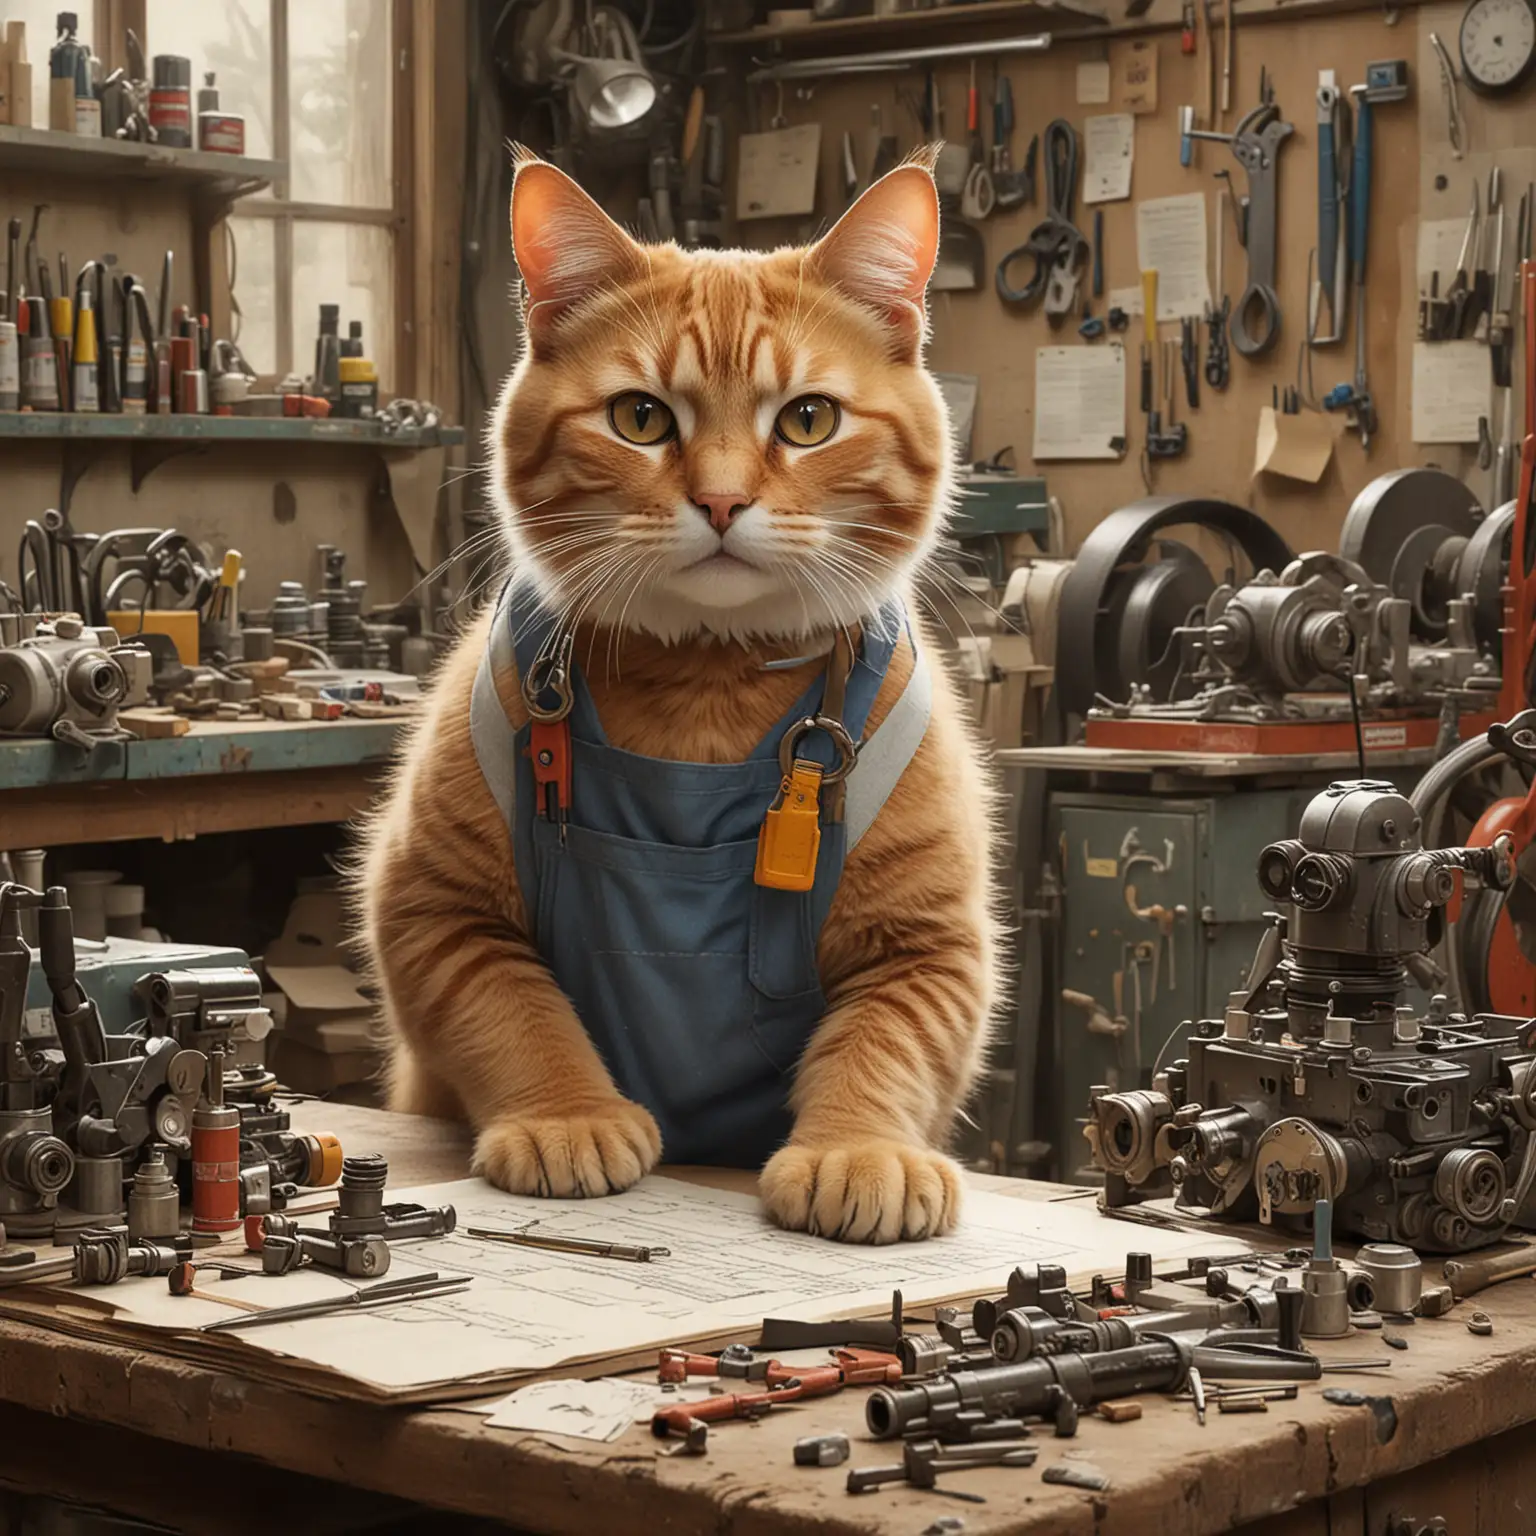 Clever Cat Mechanic Supervising Busy Repair Shop with Furry Assistants